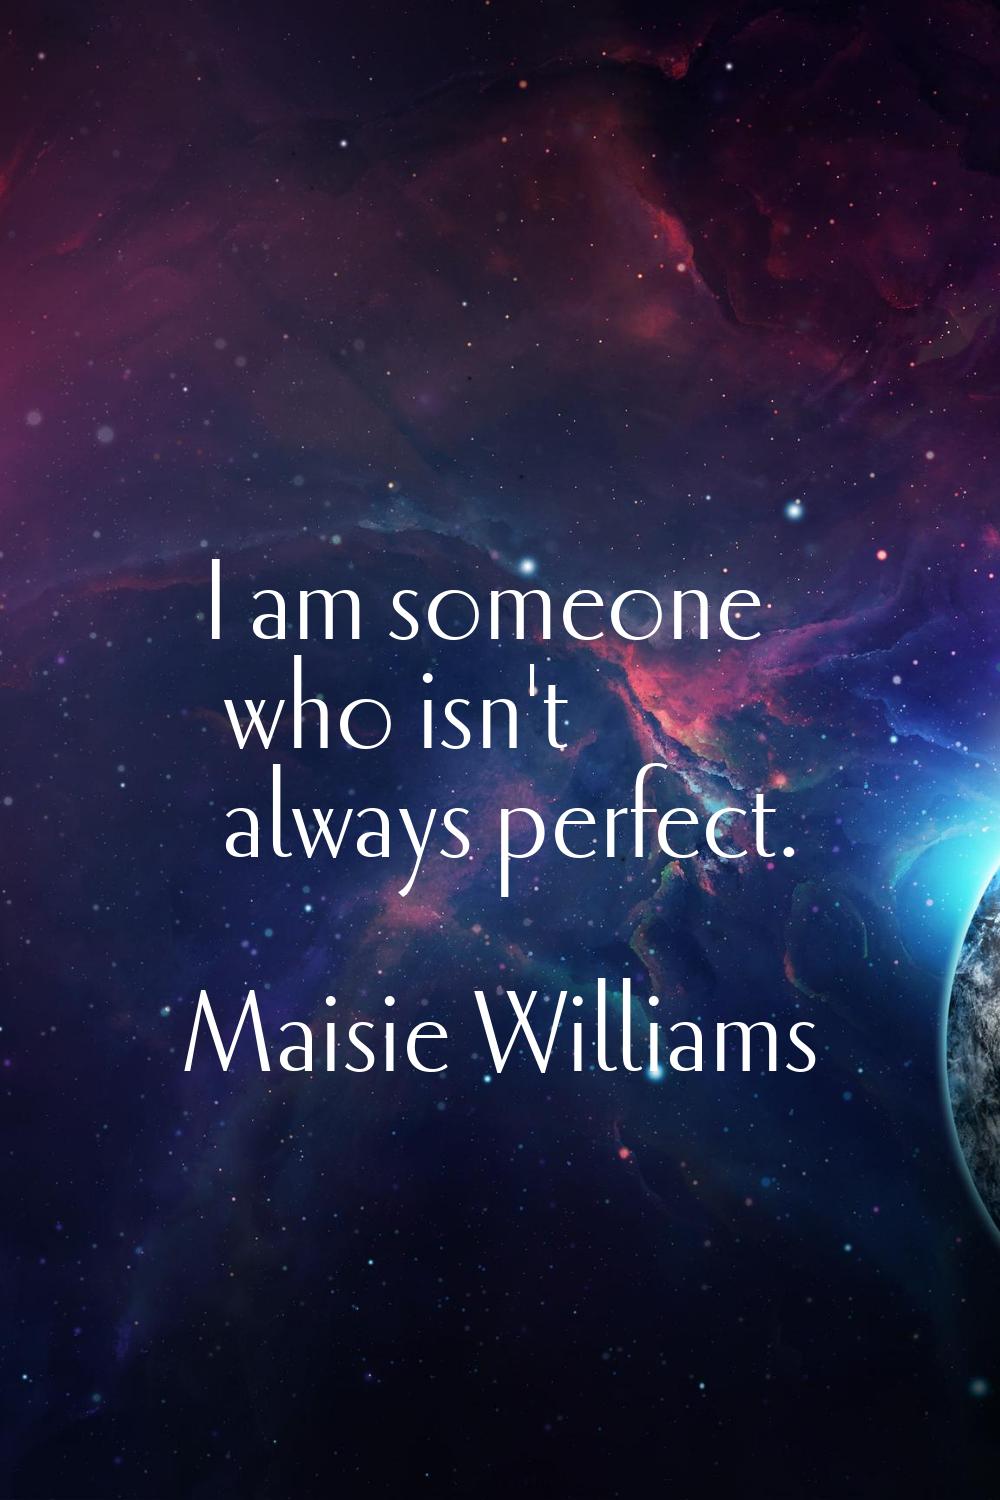 I am someone who isn't always perfect.